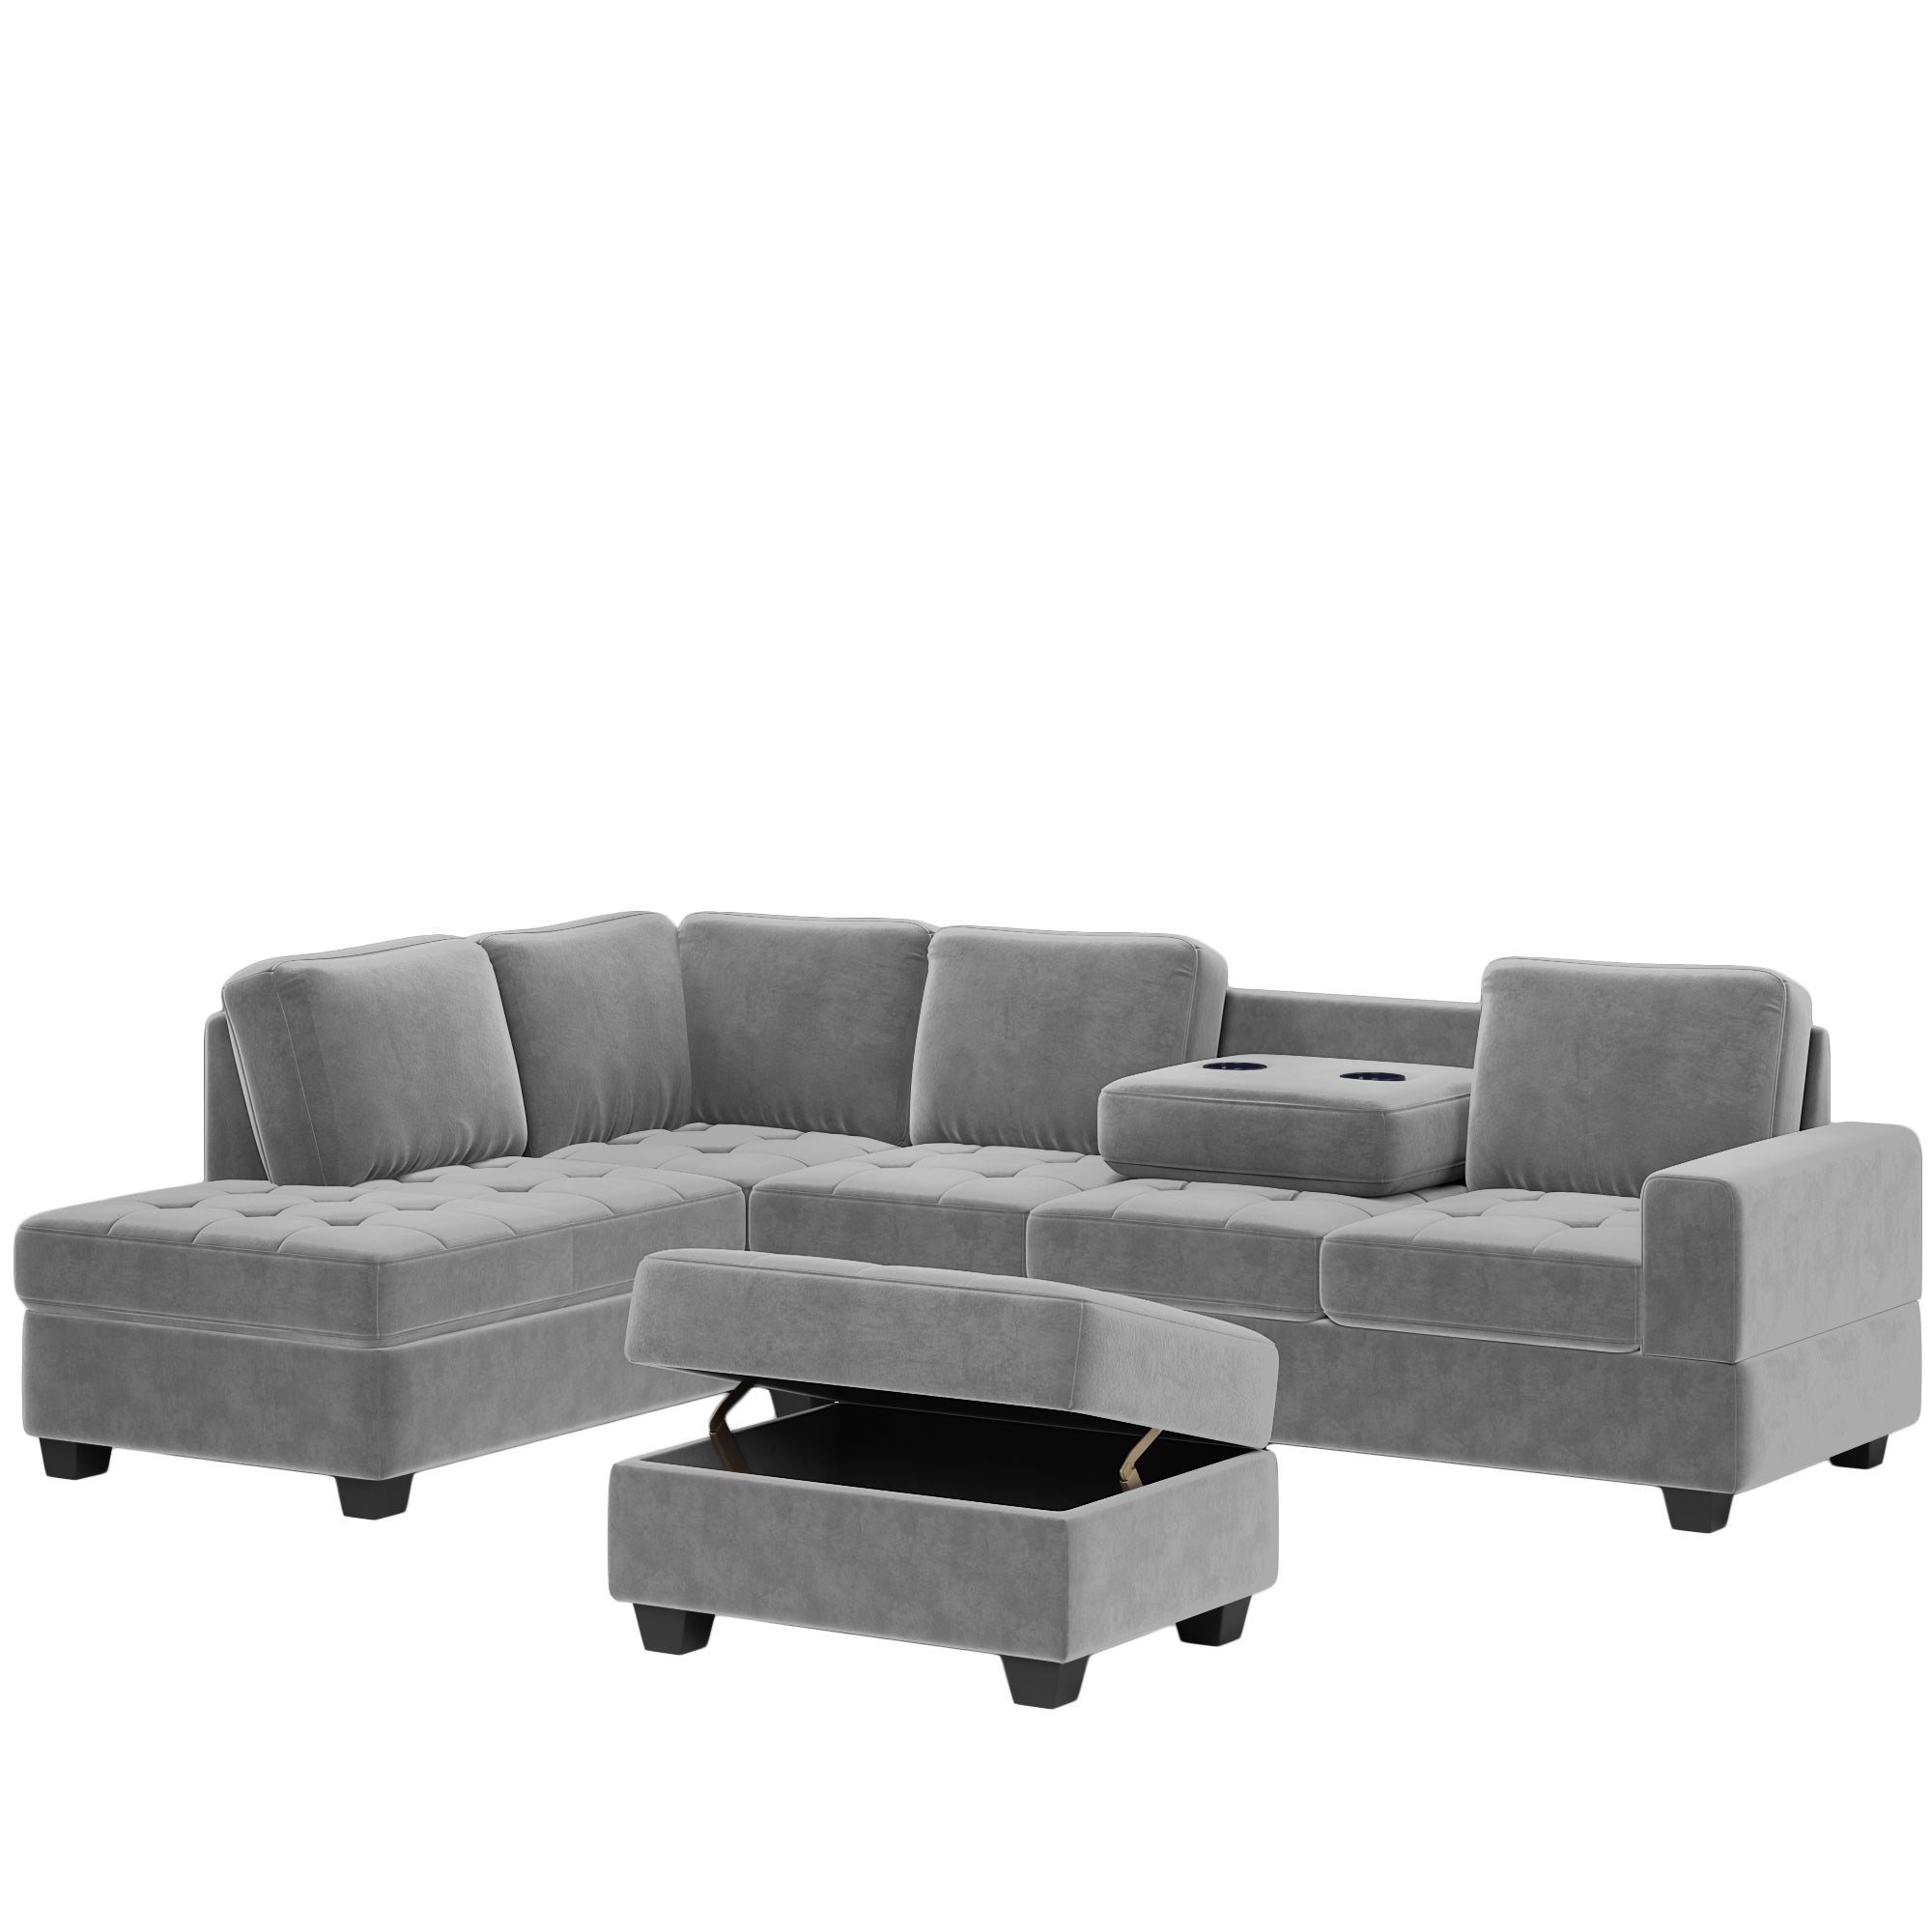 Oris fur Modern Sectional Sofa: Reversible Chaise, L-Shaped Couch Set with Storage Ottoman, Two Cup Holders - Living Room Comfort-Stationary Sectionals-American Furniture Outlet